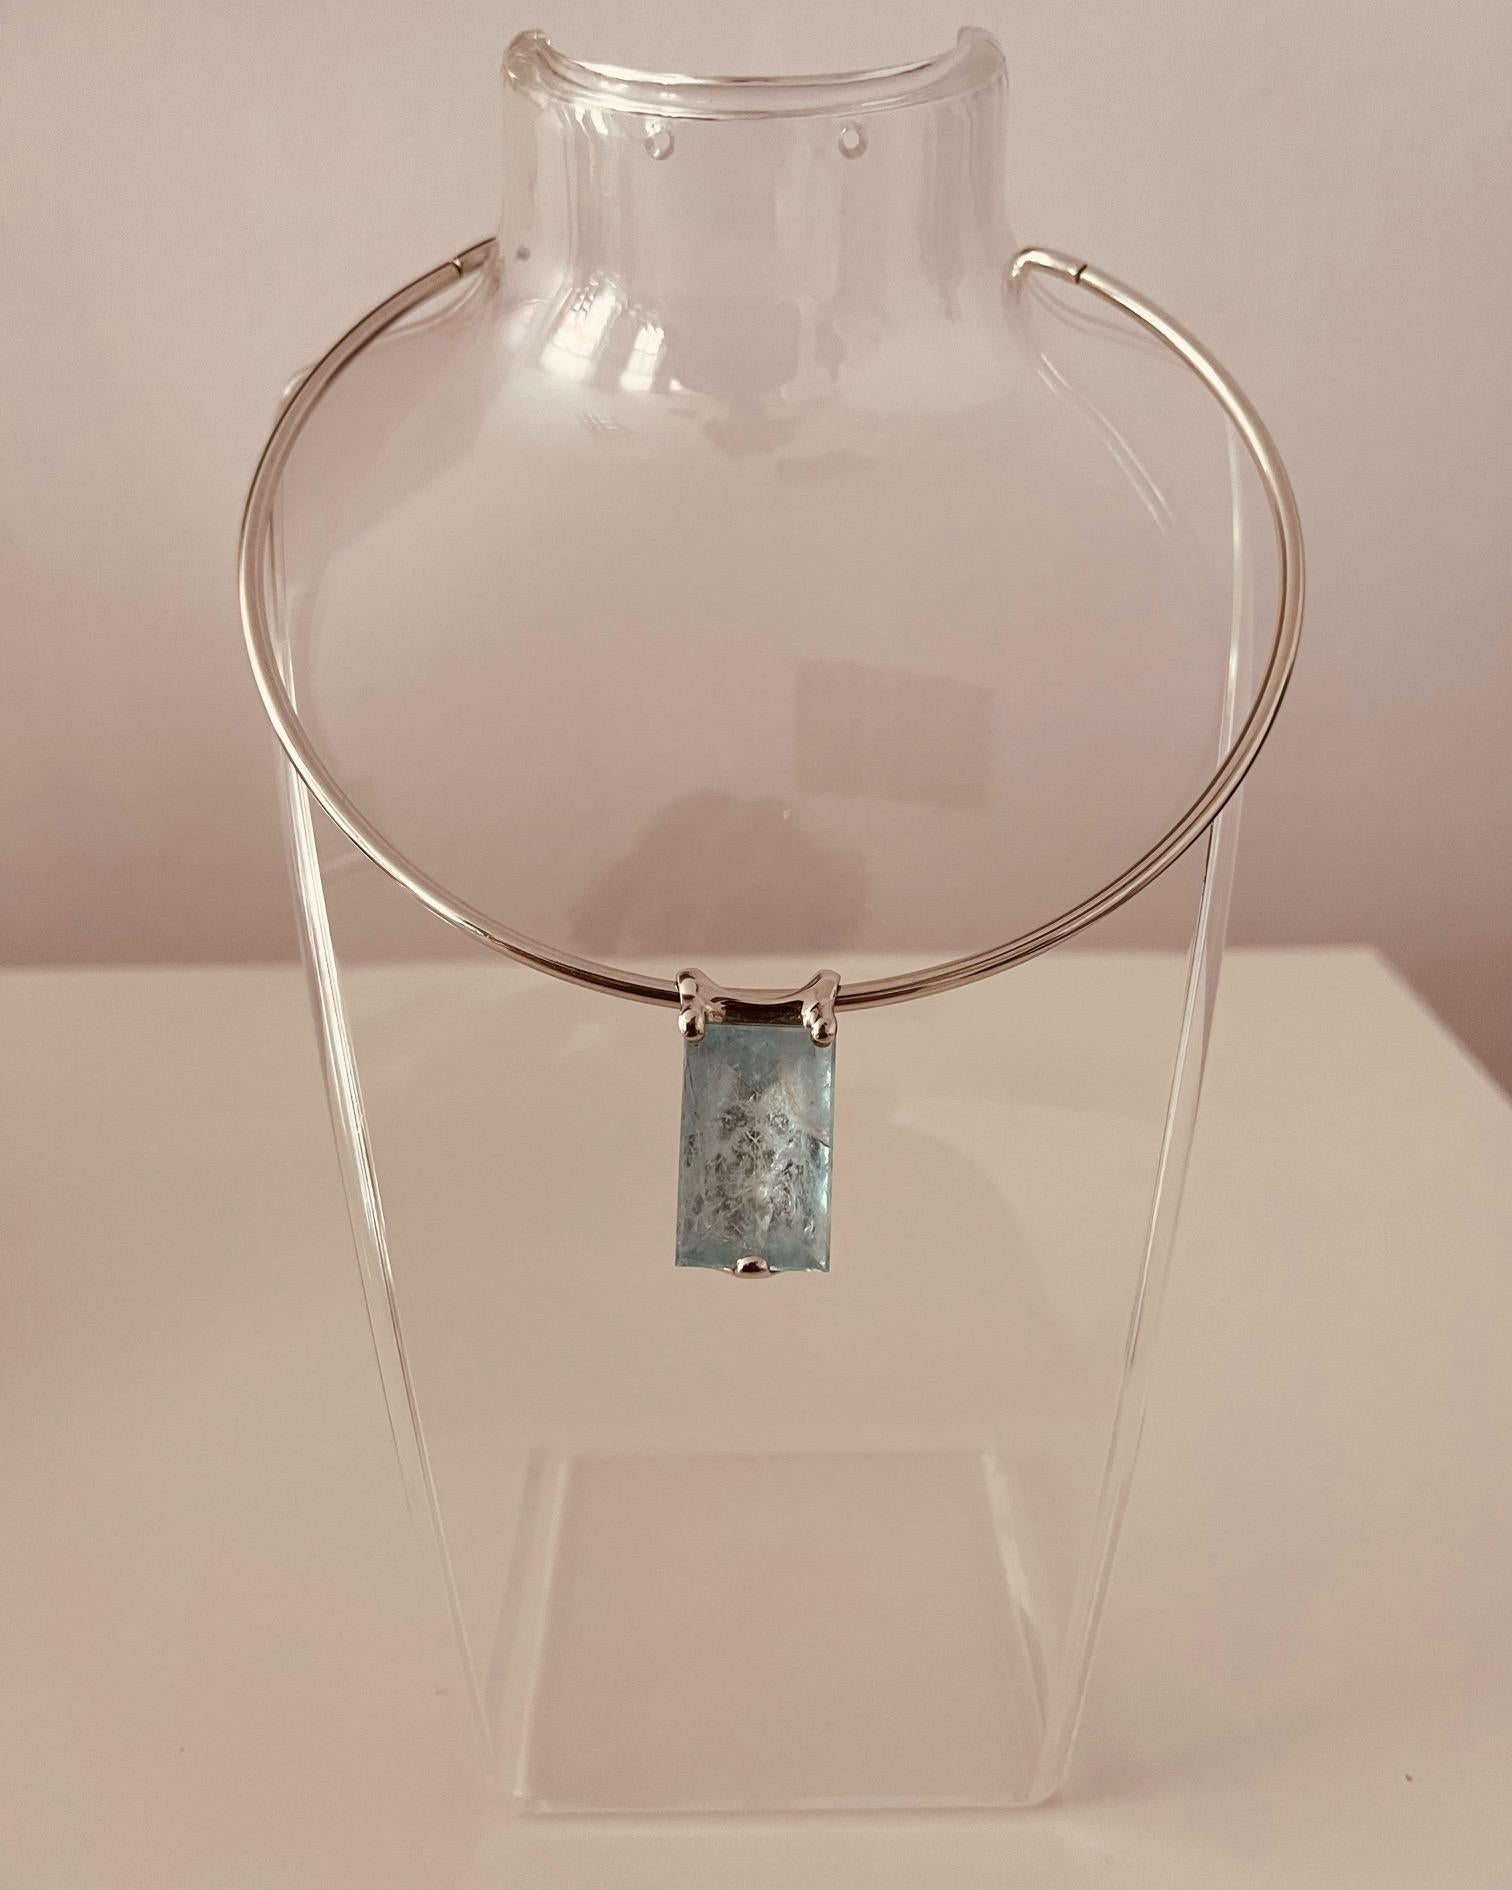 18 Carat White Gold Choker, 12cm Diameter, With Aquamarine Removable Pendant In Excellent Condition For Sale In London, GB